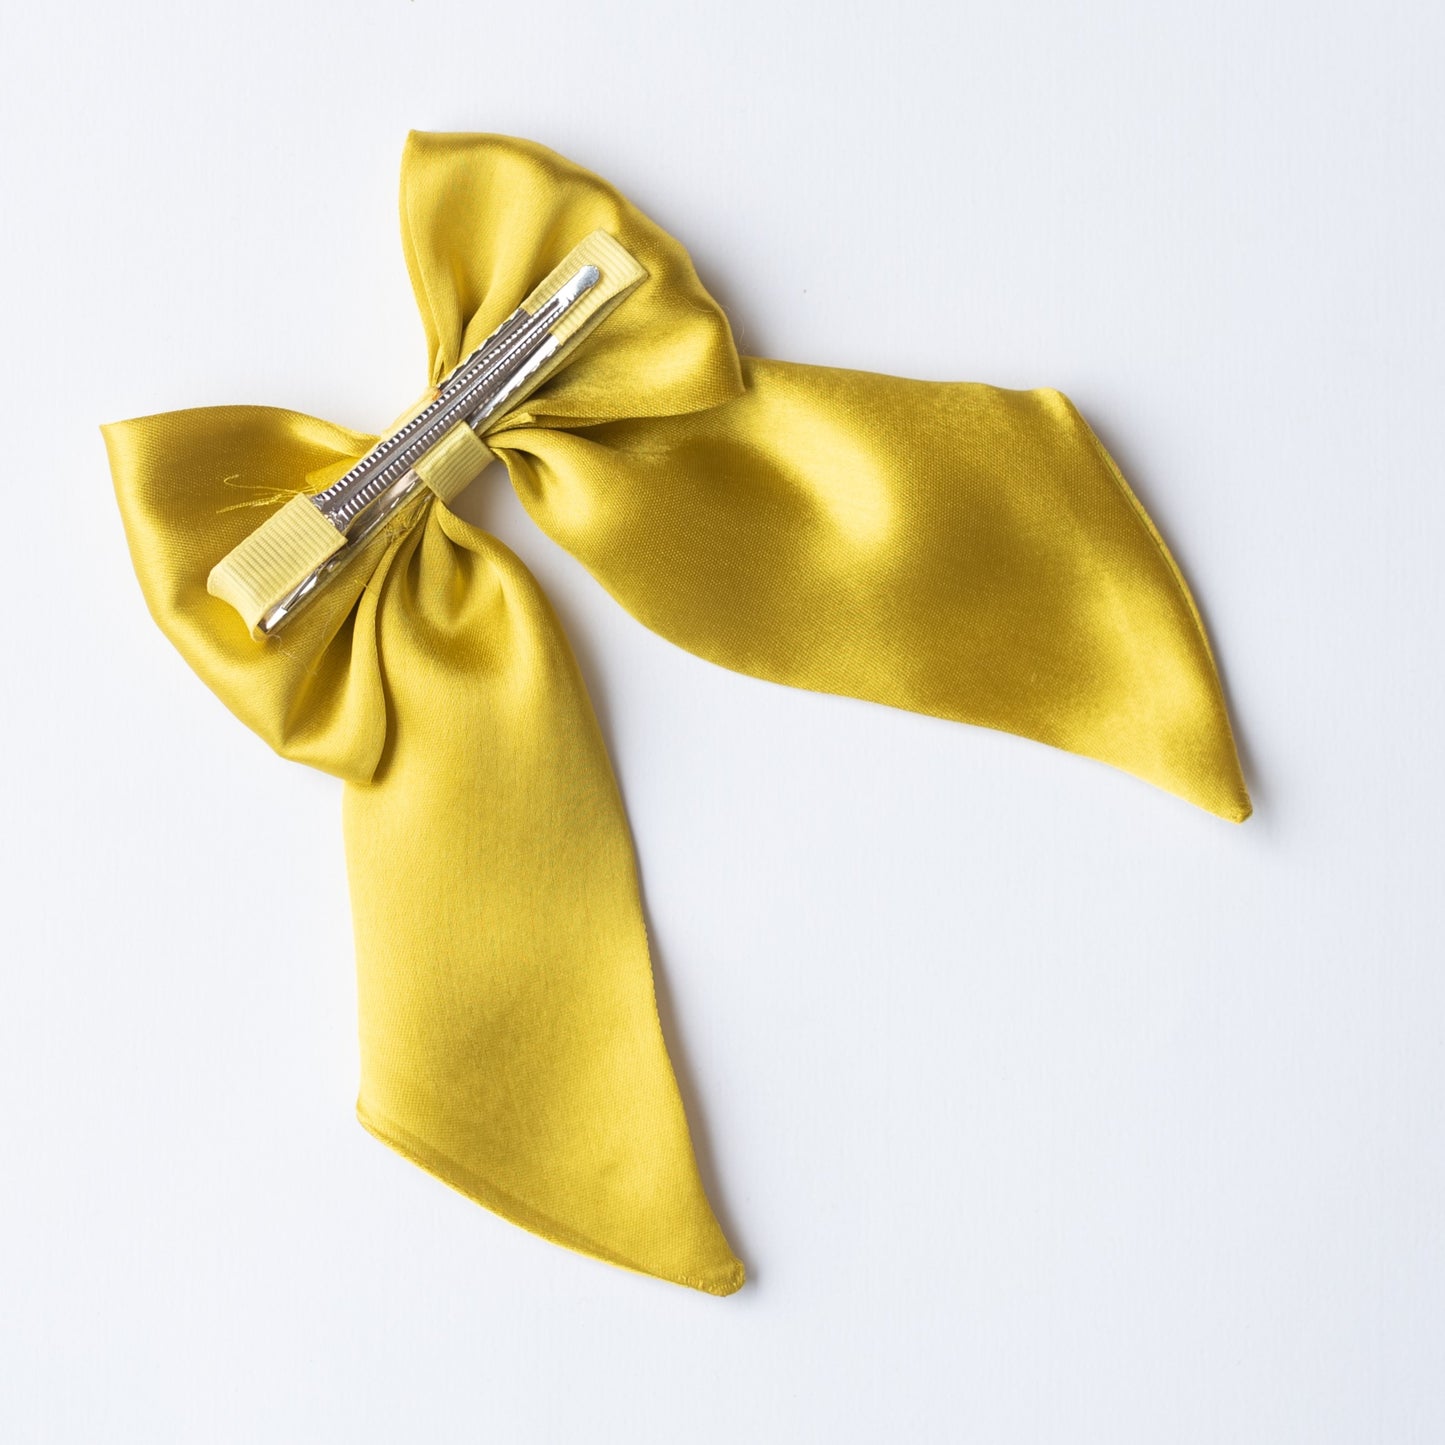 Big fancy satin bow on alligator clip embellished with pearls - Yellow